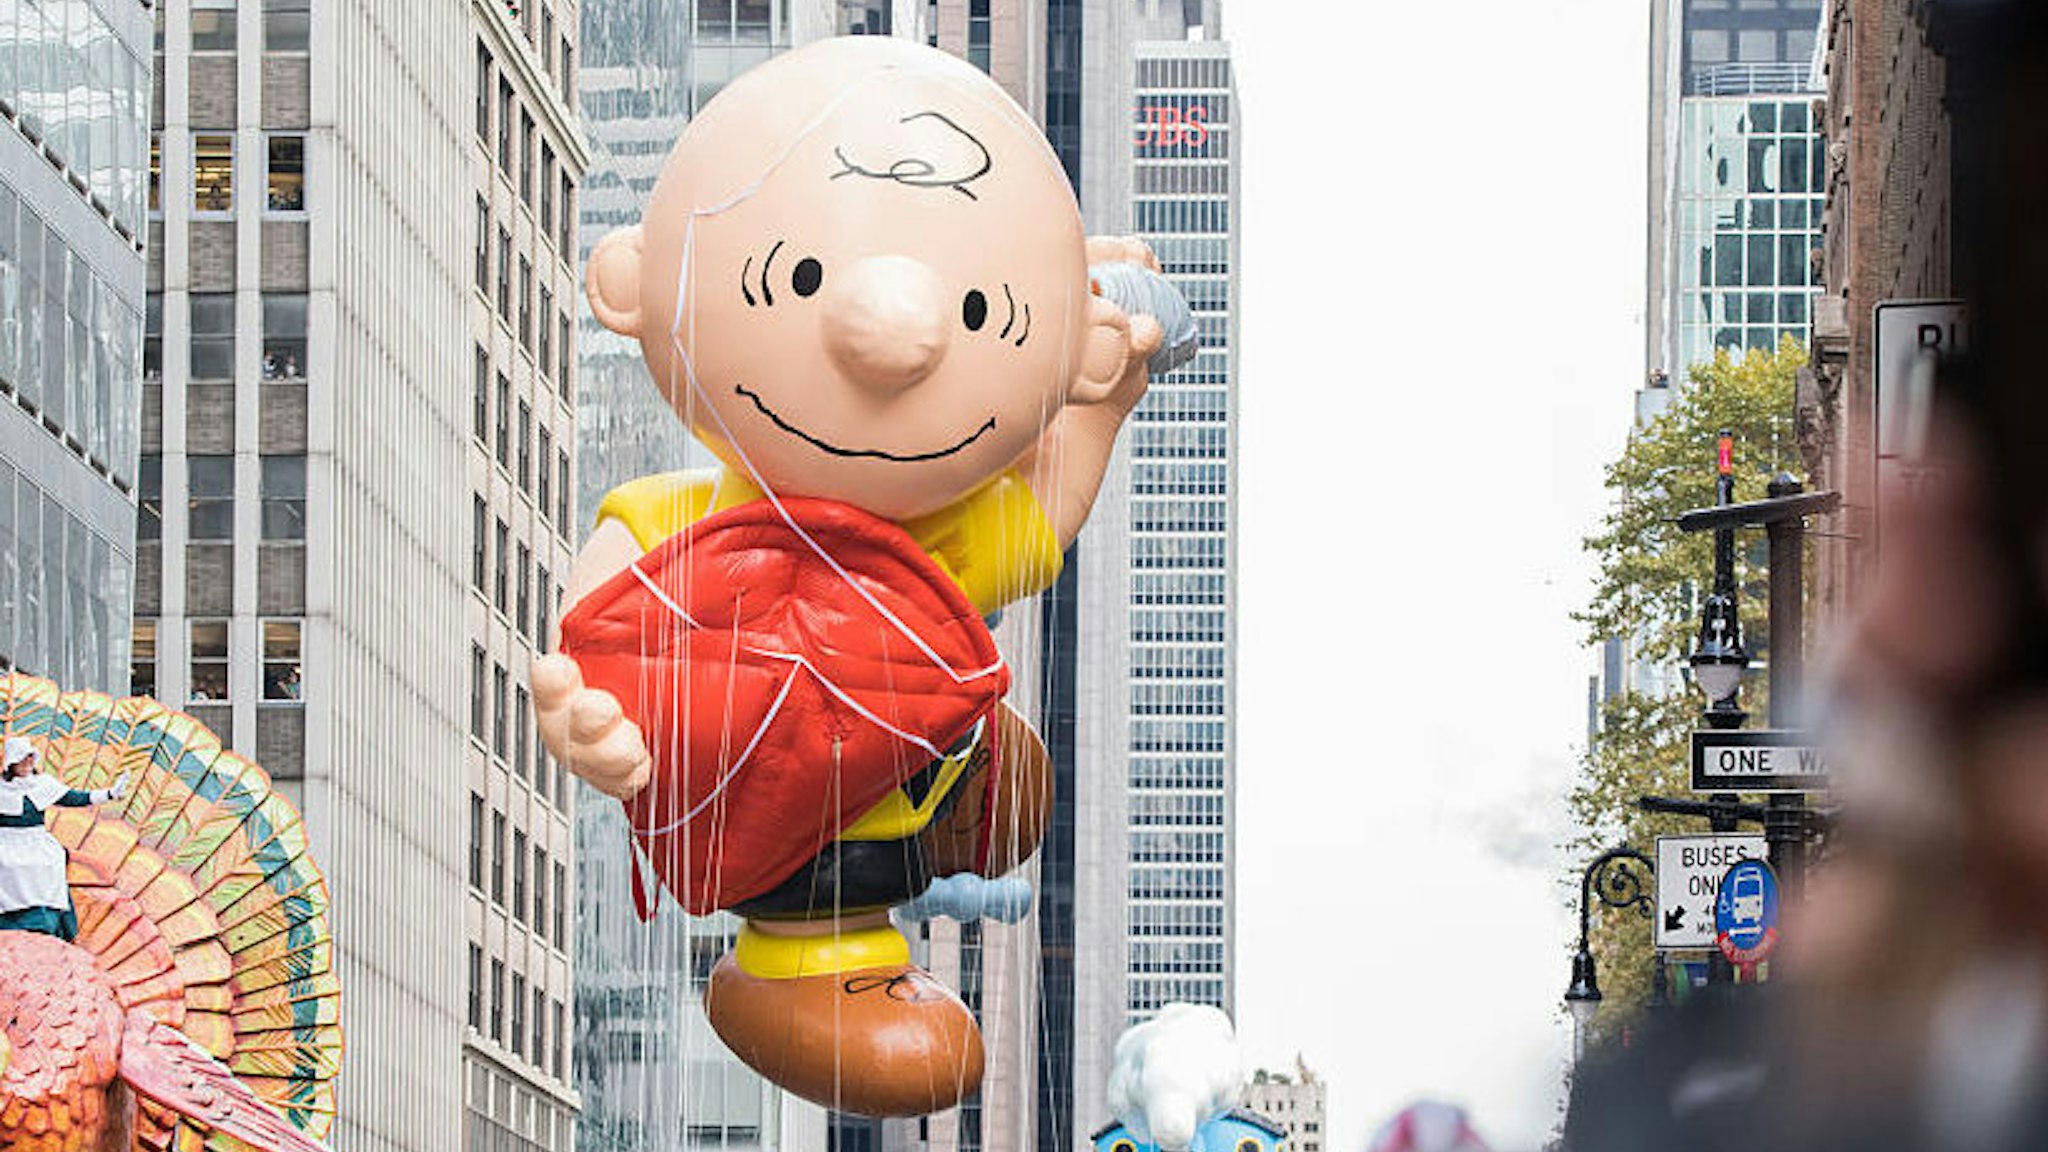 NEW YORK, NY - NOVEMBER 24: Charlie Brown balloon is seen at the 90th Annual Macy's Thanksgiving Day Parade on November 24, 2016 in New York City.